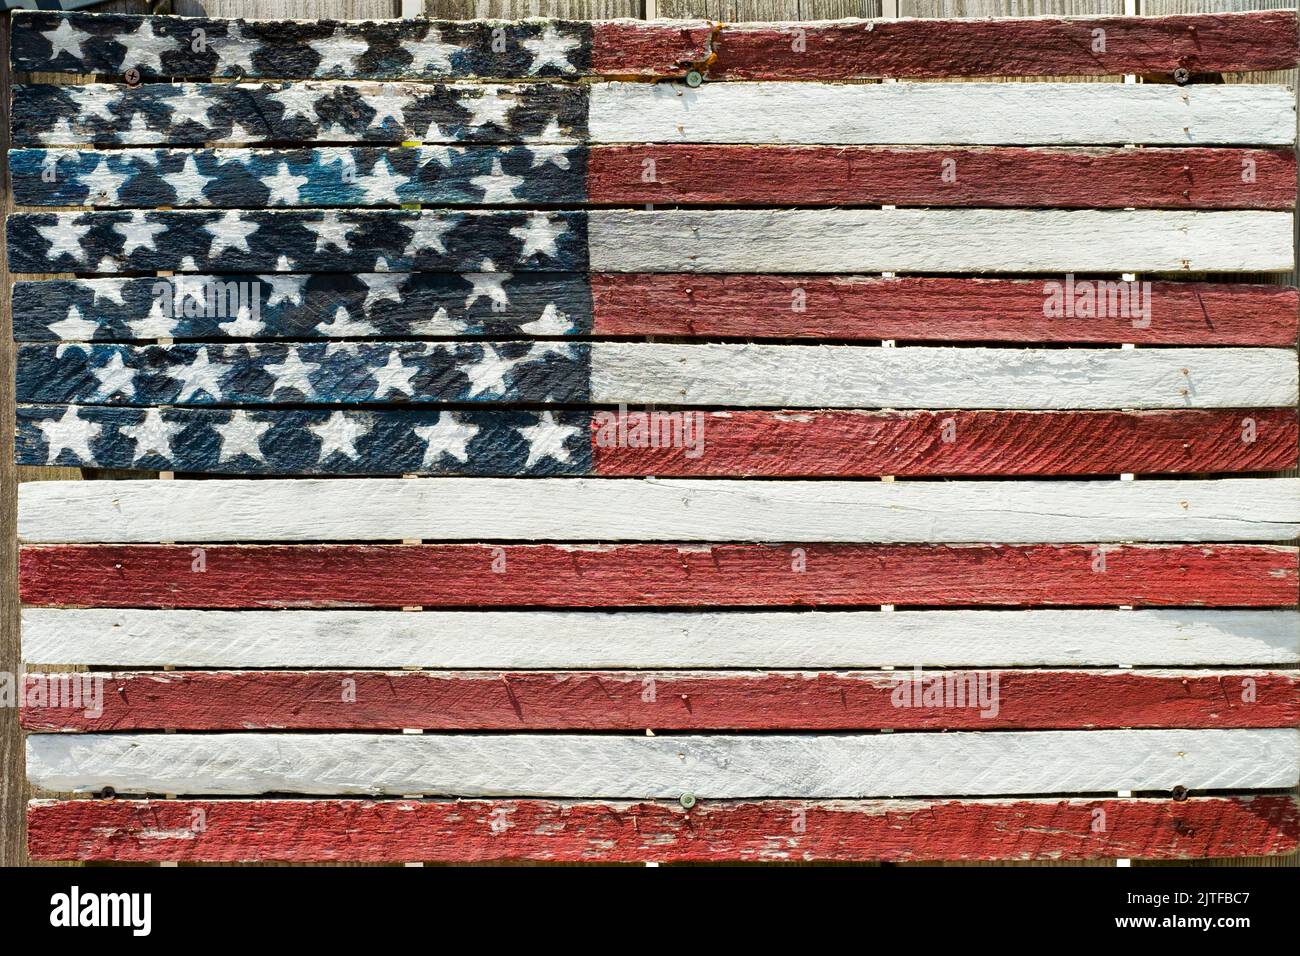 Fire Island, New York. Painted rustic Amercian flag. Stock Photo